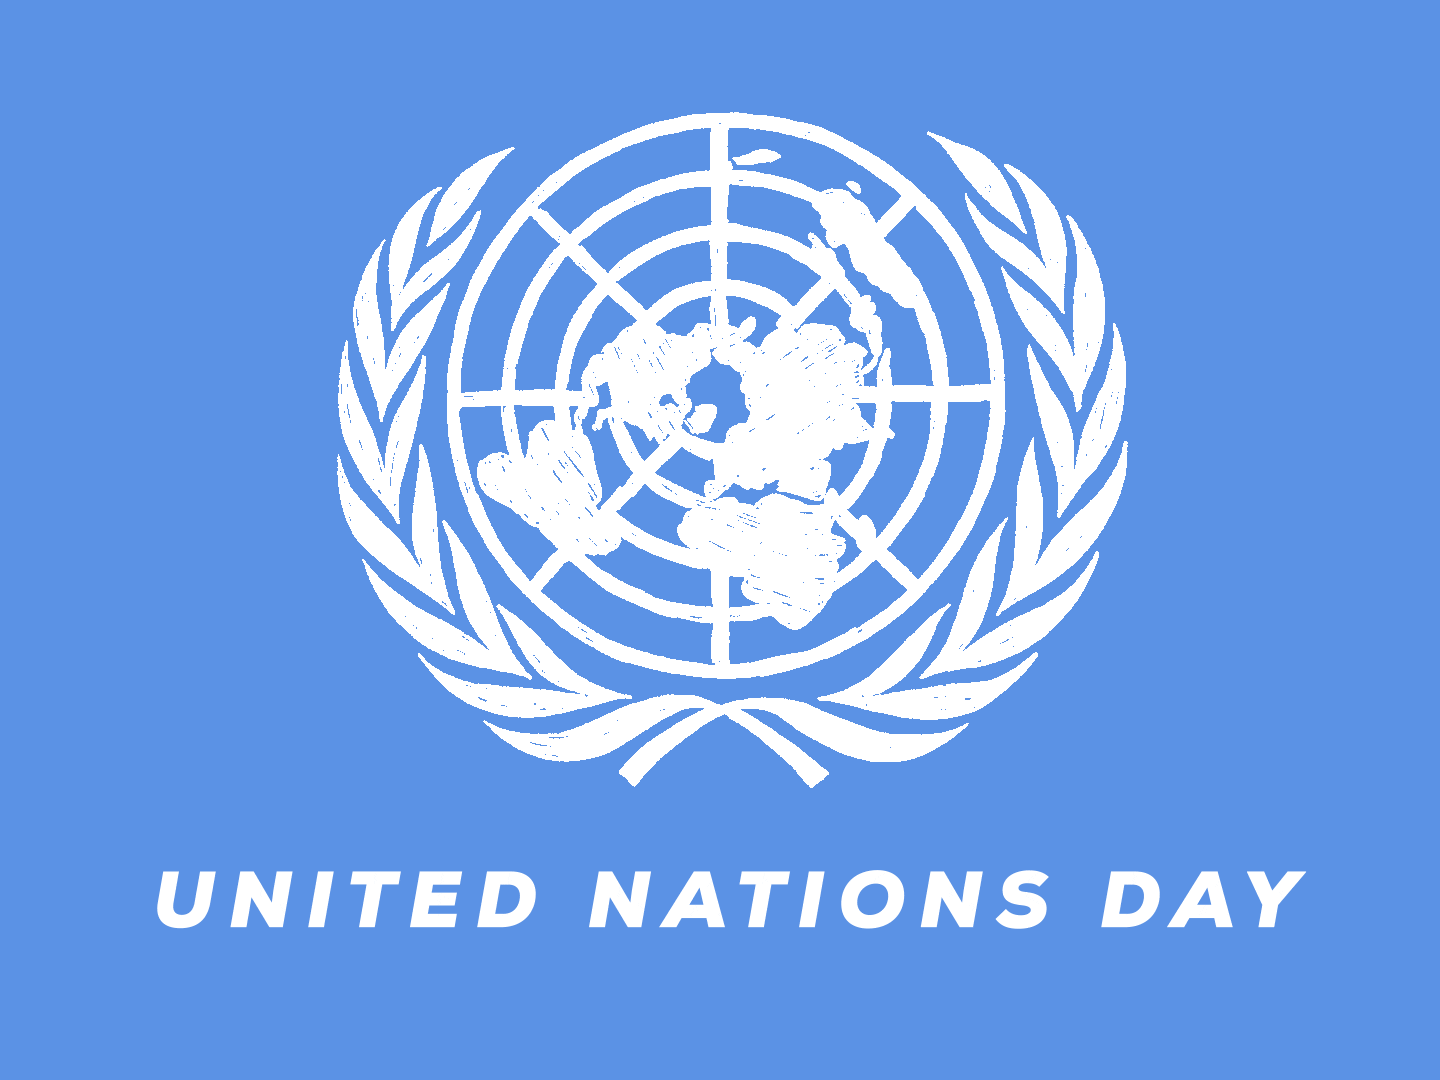 United Nations logo and peace sign rotating gif